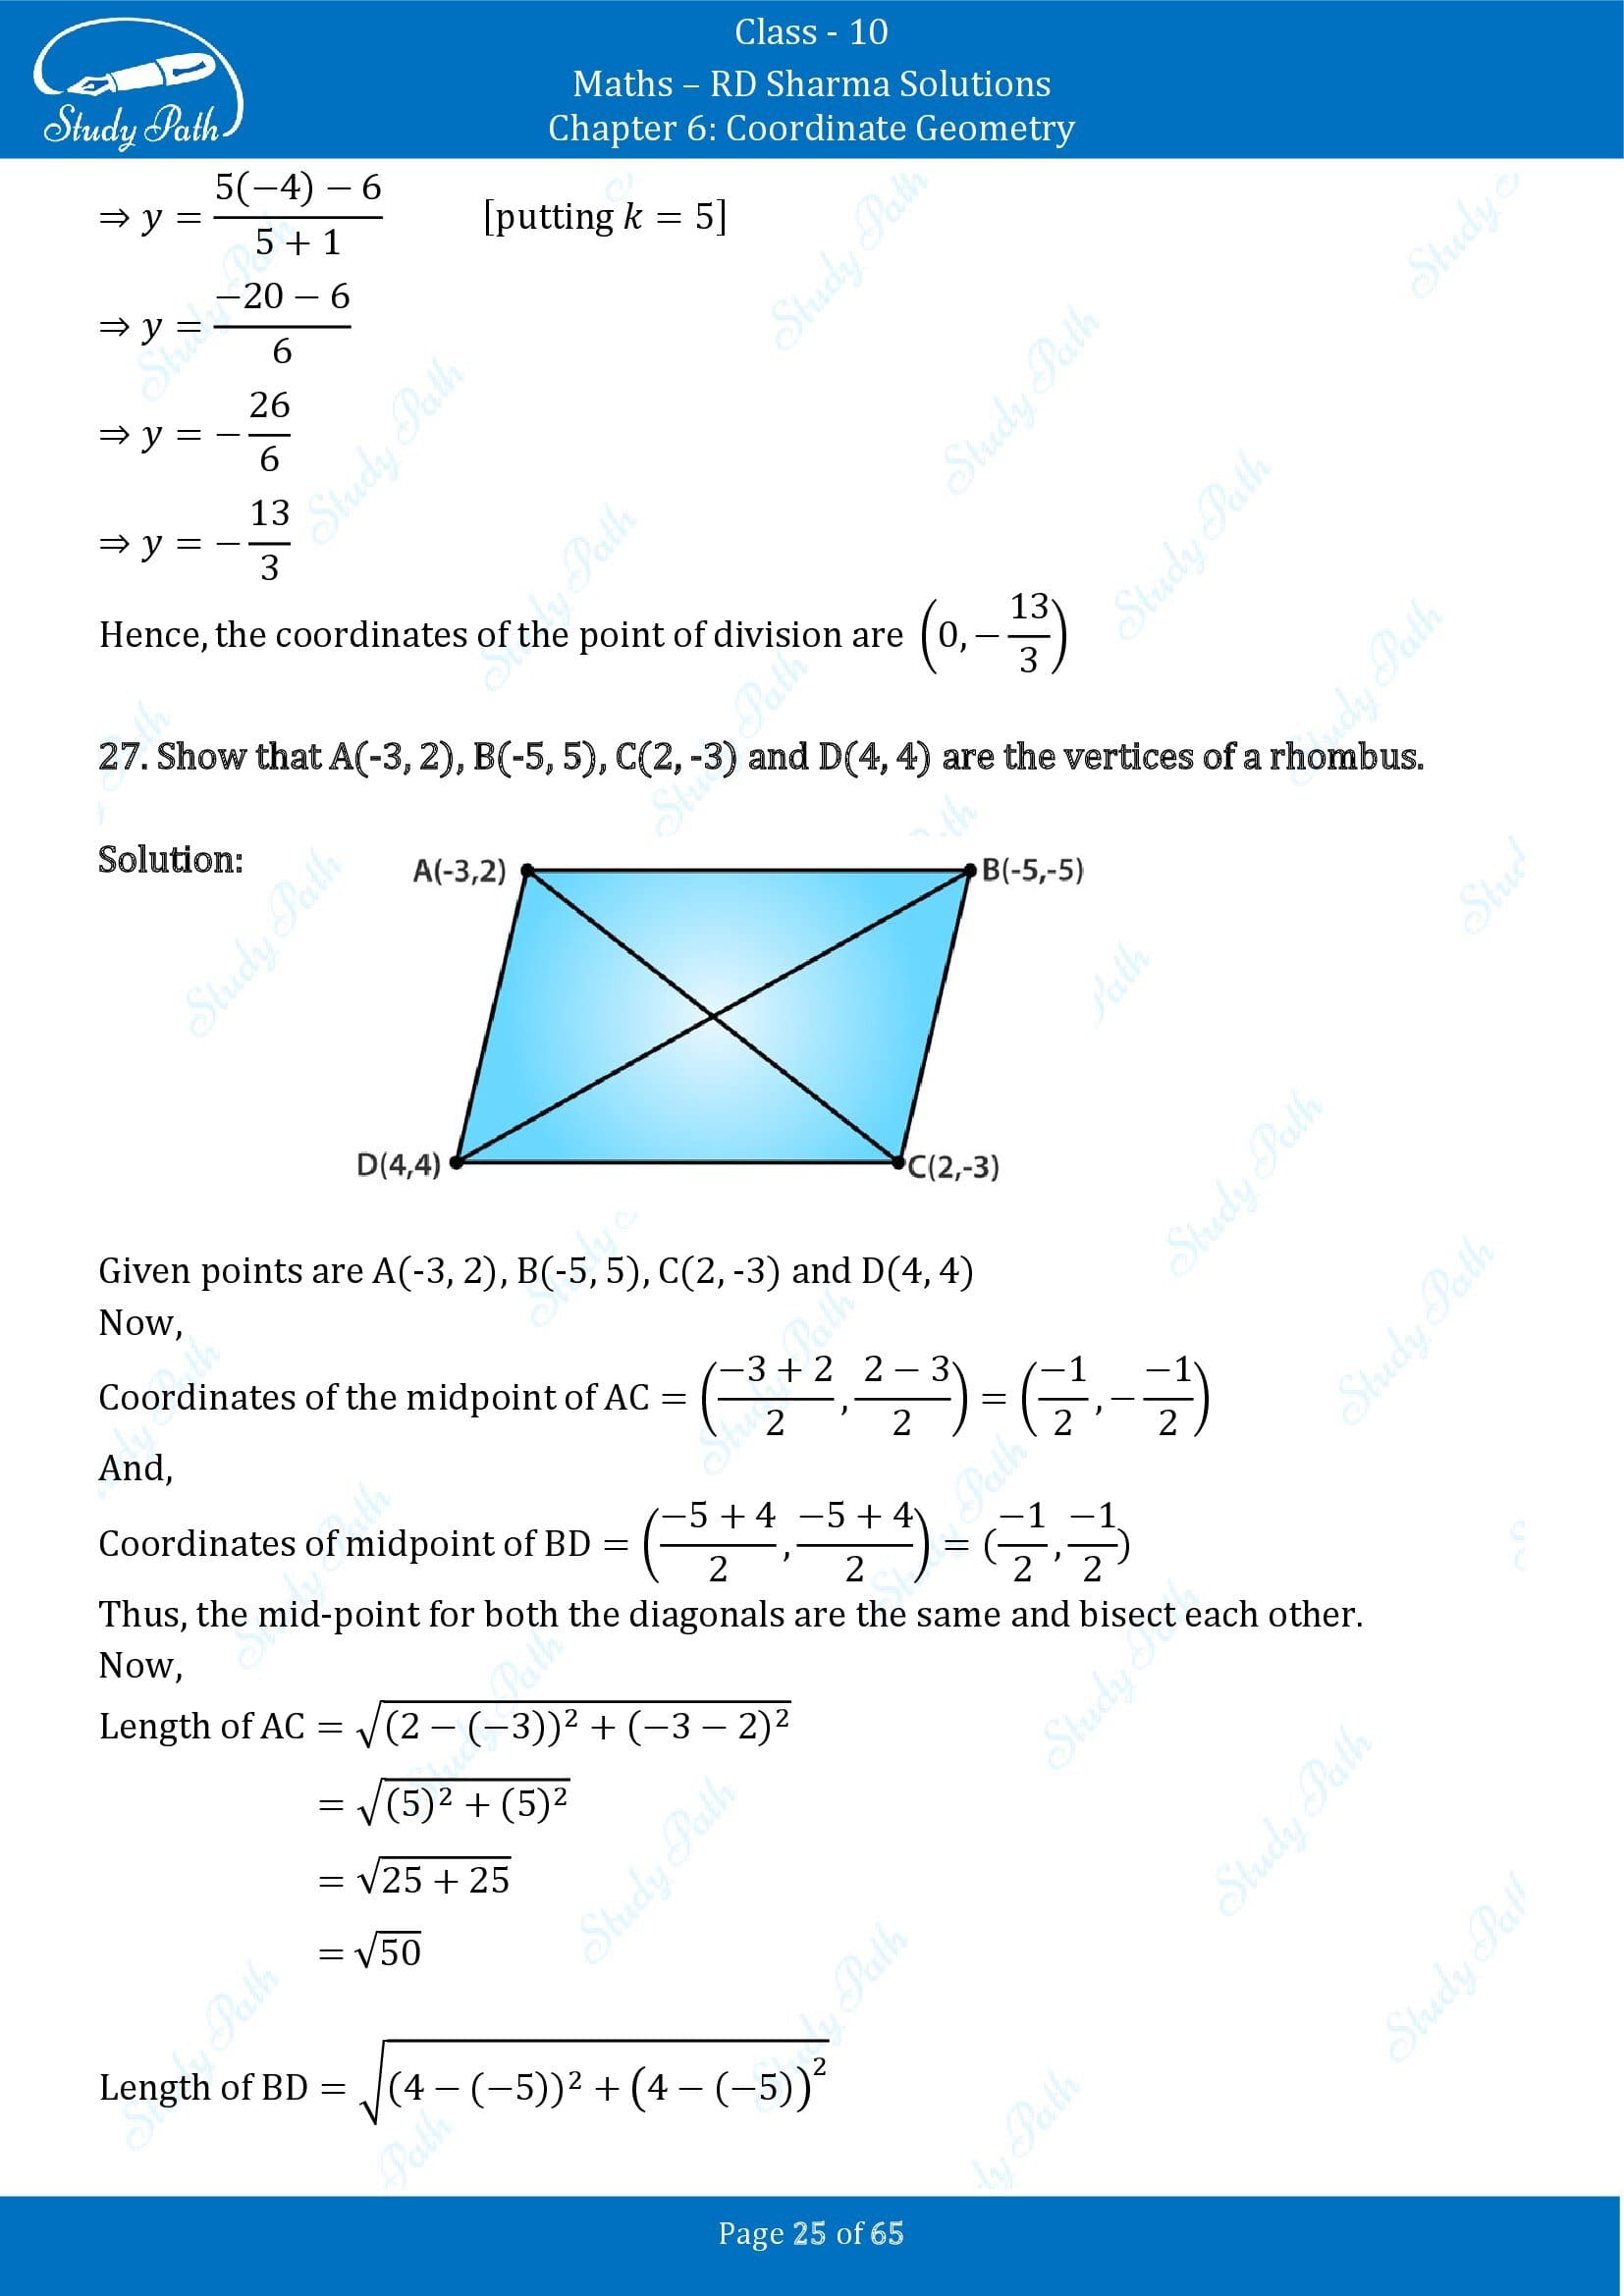 RD Sharma Solutions Class 10 Chapter 6 Coordinate Geometry Exercise 6.3 00025